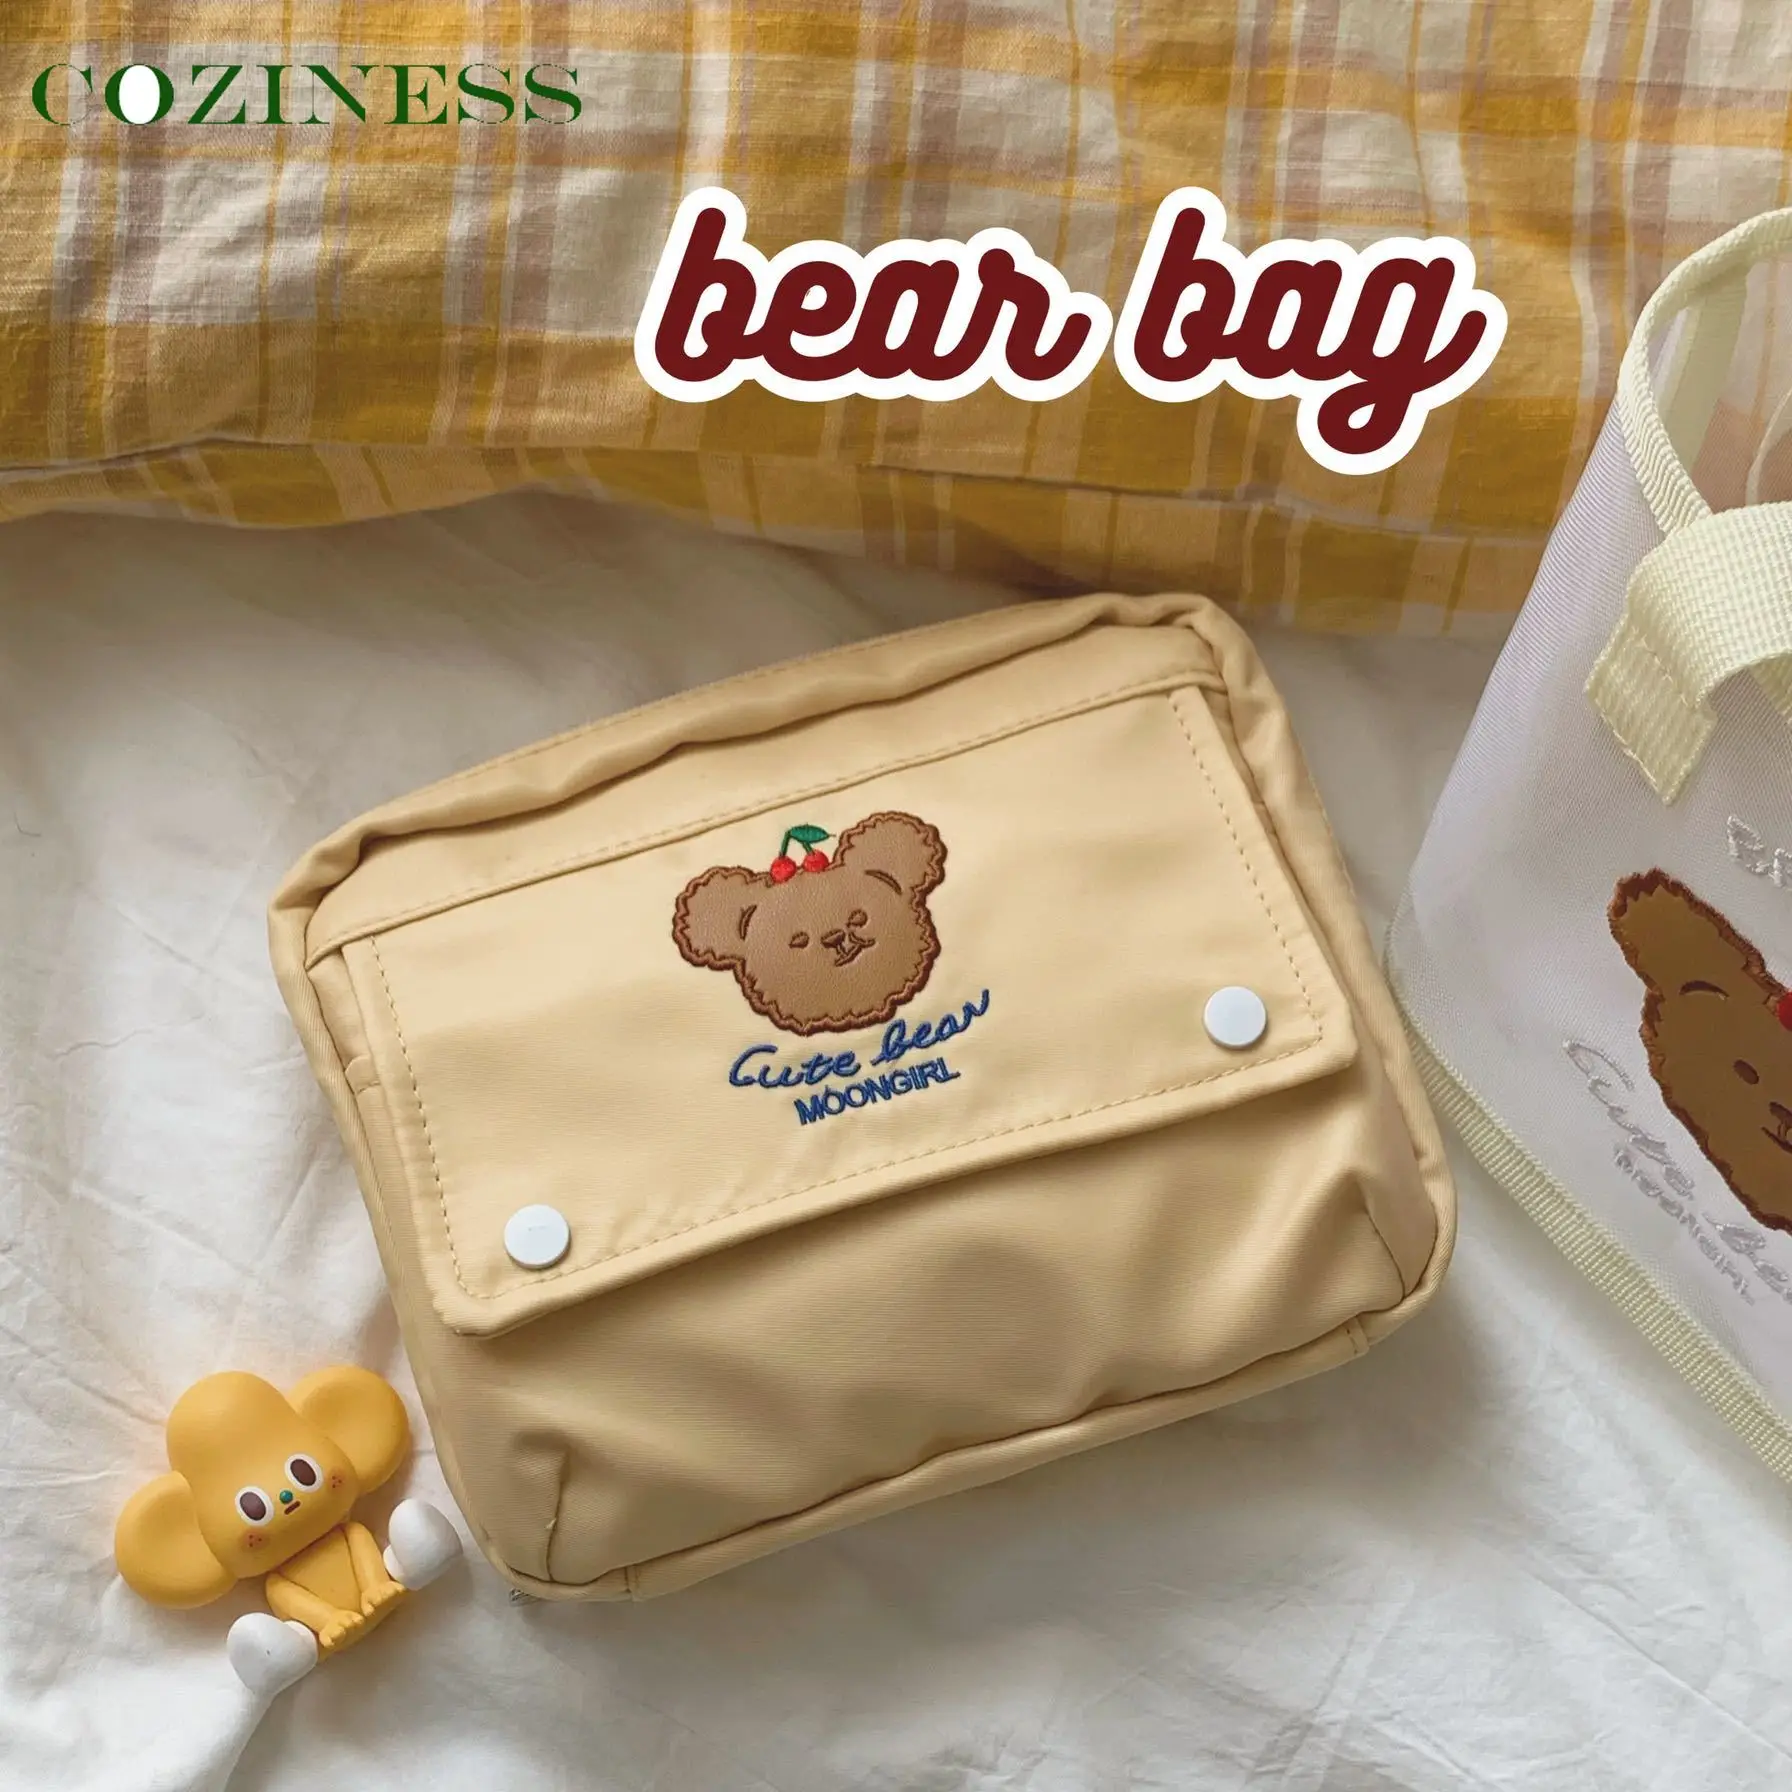 

Mommy Portable Storage Bag Warm Yellow Smile Bear Clutch Bag Double Layers Carry Single Package For Outing Baby Diaper Handbag